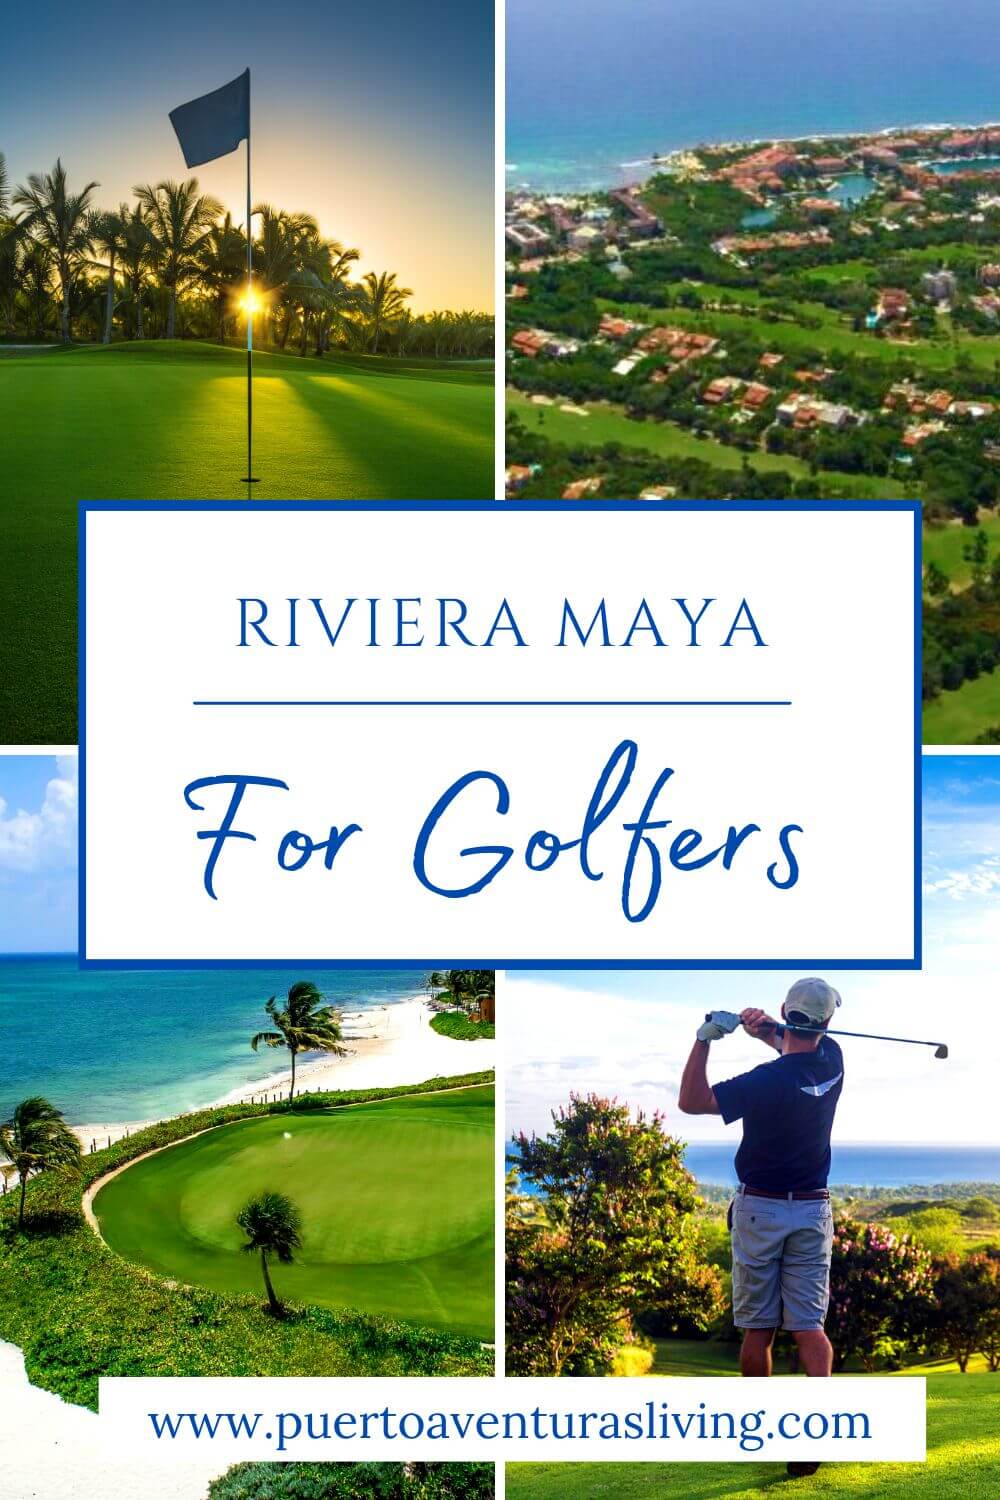 Four golf courses in the Riviera Maya